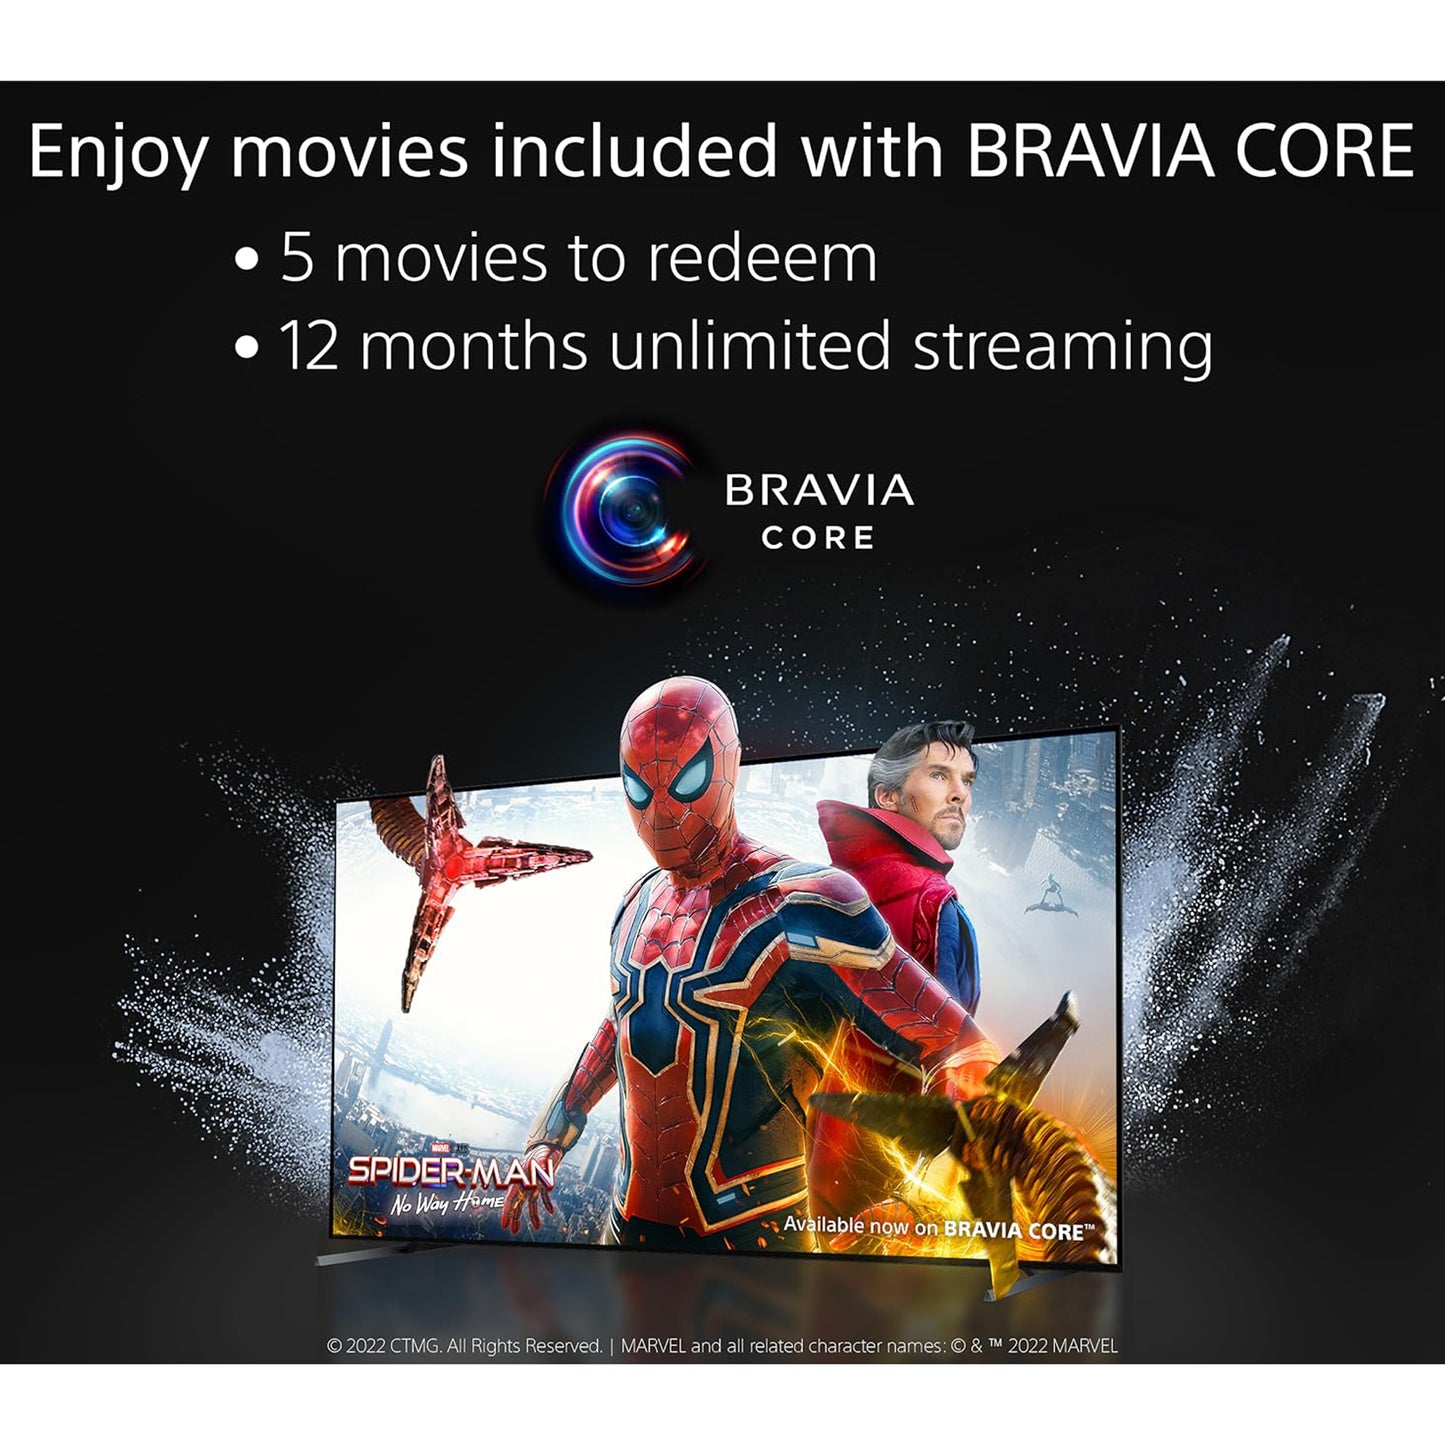 Sony 100 inch Android Smart TV - 4K - 120Hz, XR-100X92